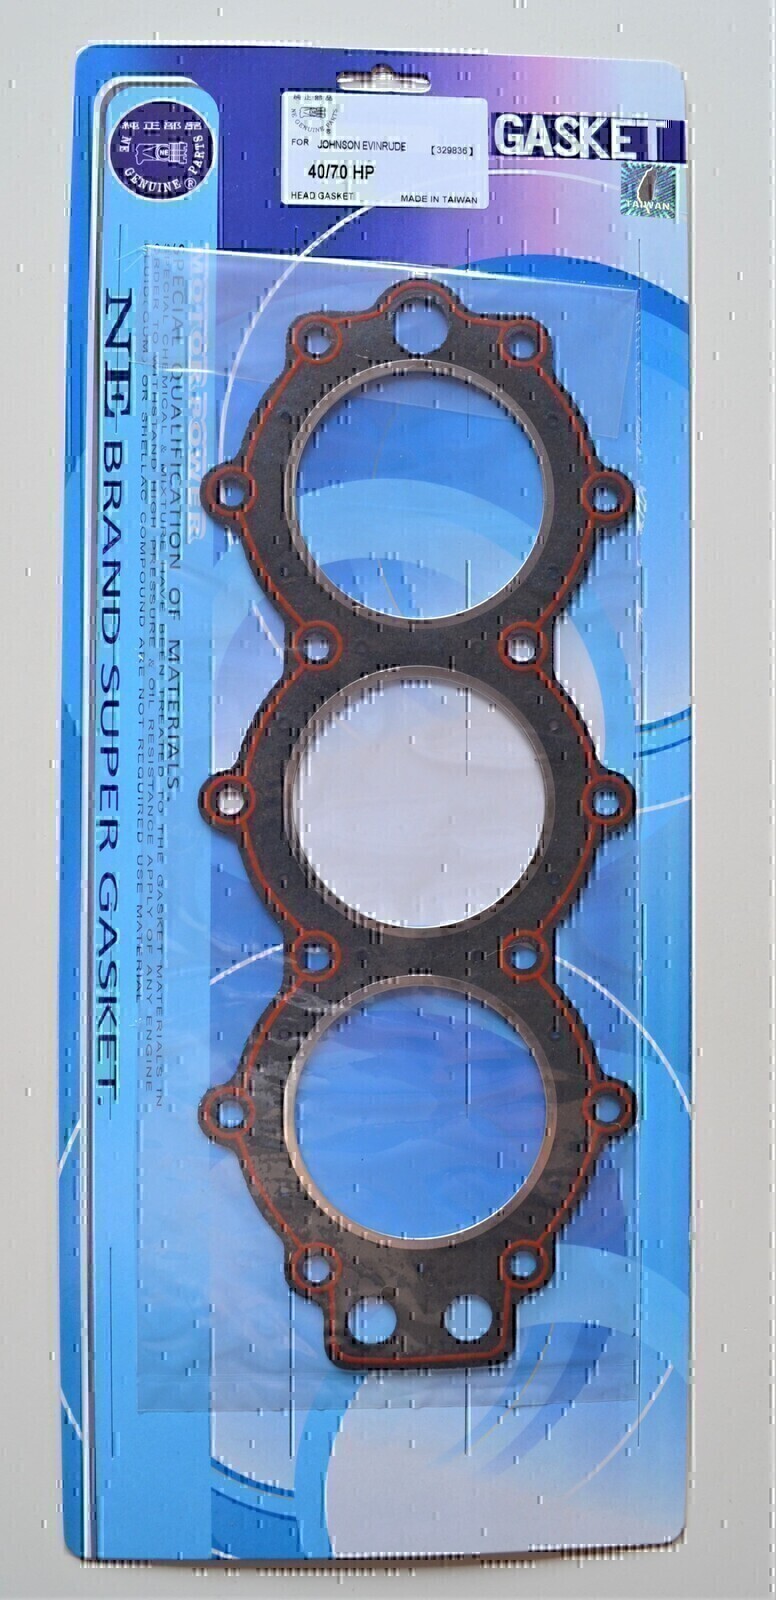 HEAD GASKET FOR EVINRUDE JOHNSON 60HP 65HP 70HP OUTBOARD MOTOR # 329836